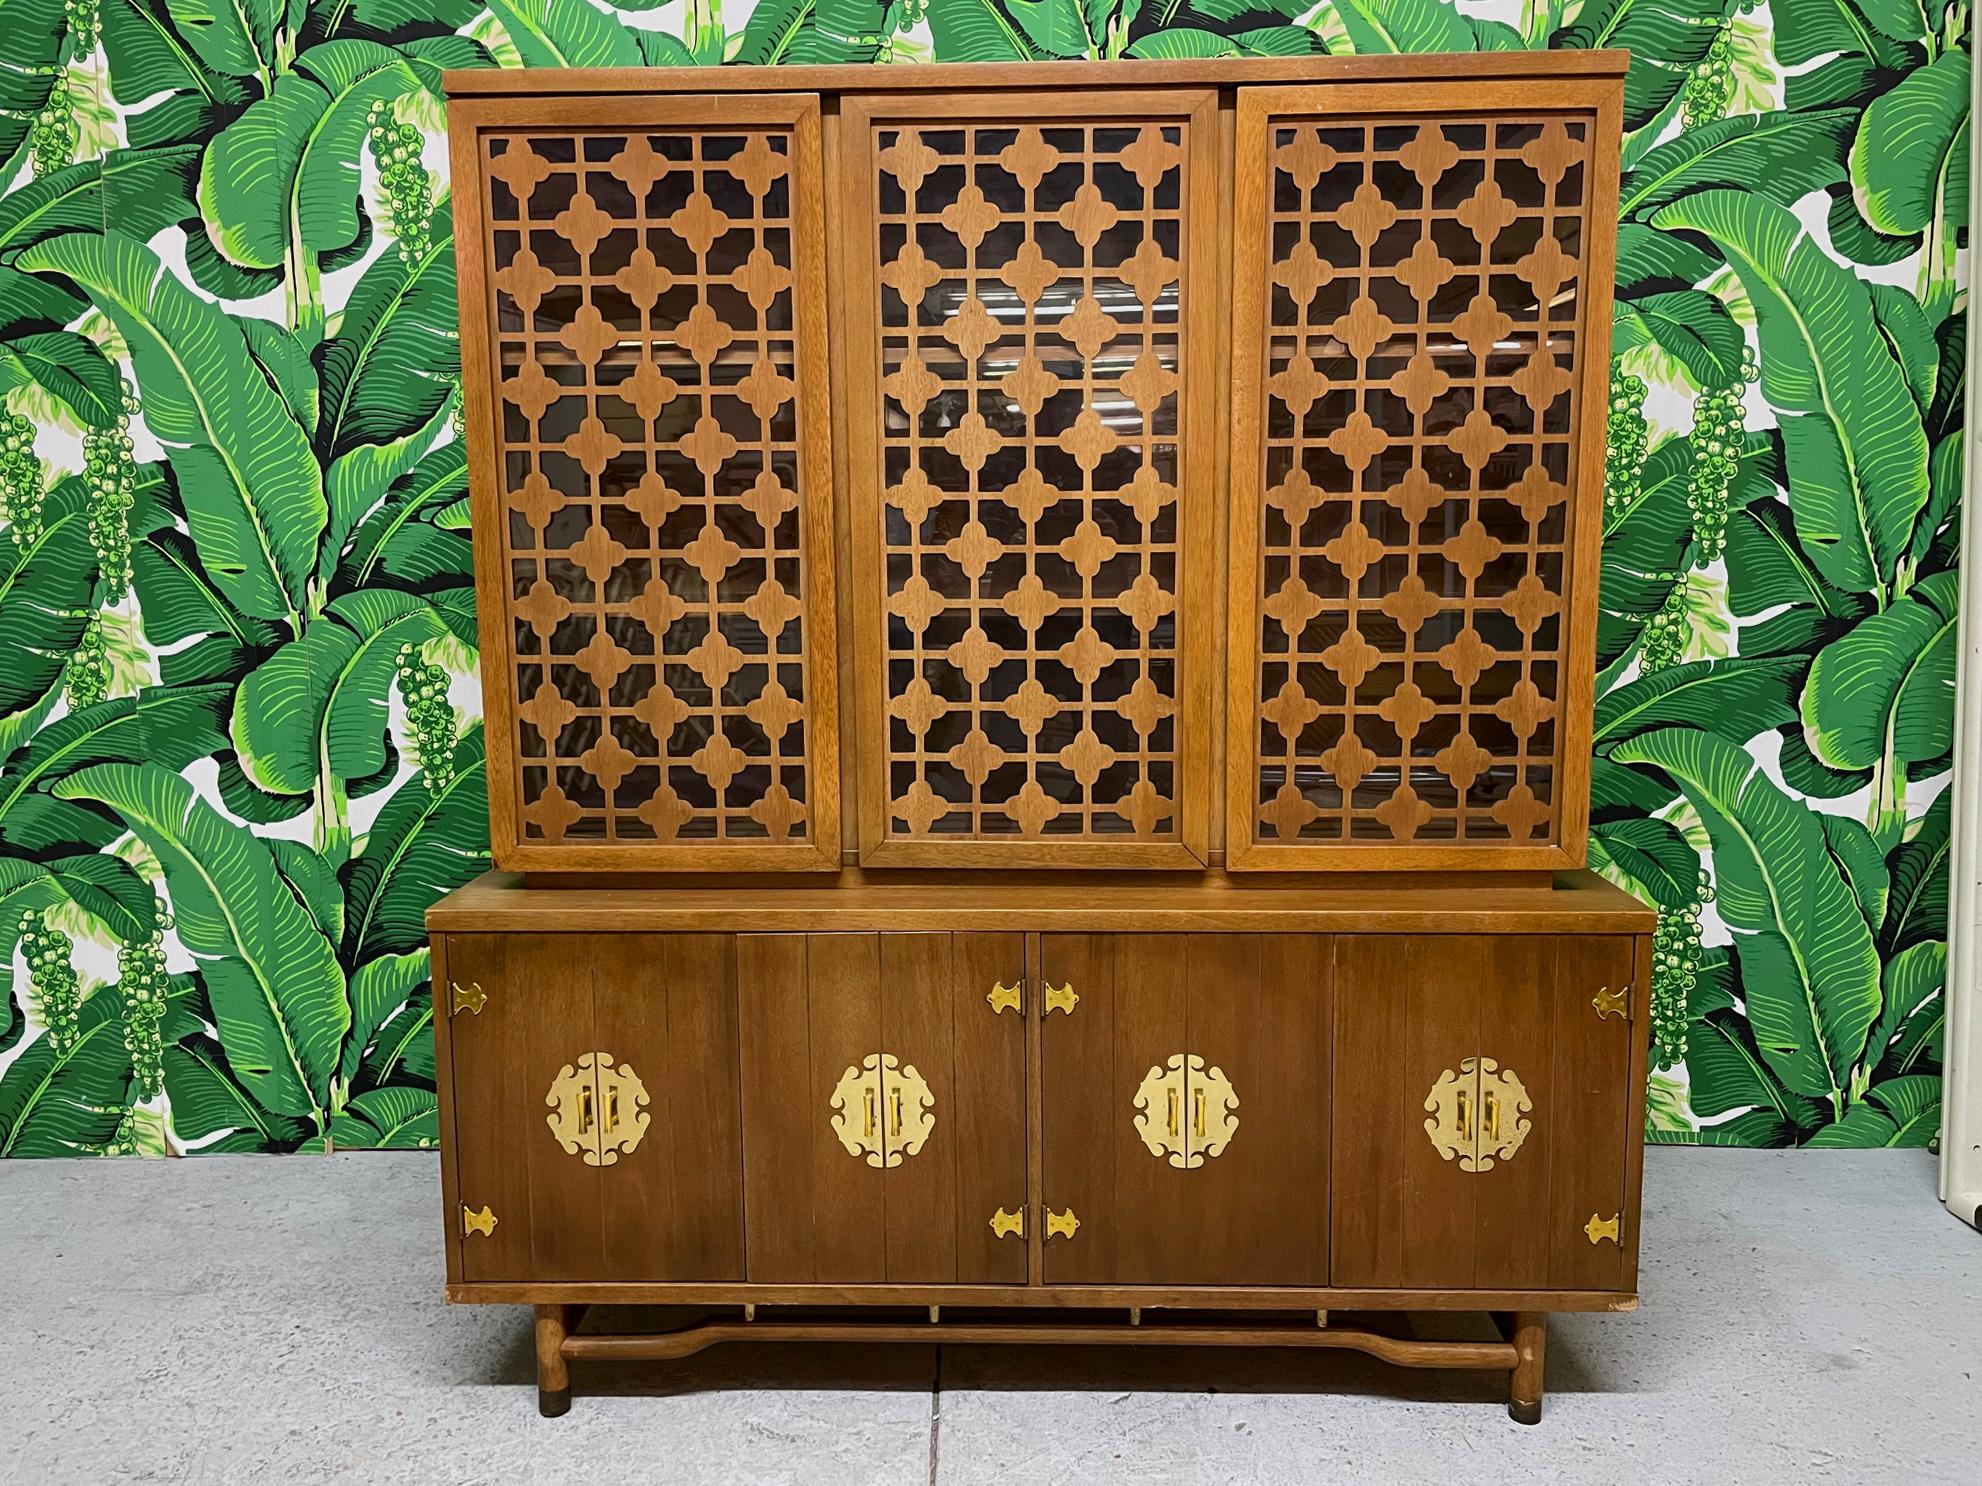 Mid century modern style china cabinet features rattan style legs and brass asian chinoiserie style hardware. Good condition with minor imperfections consistent with age (see photos).

 